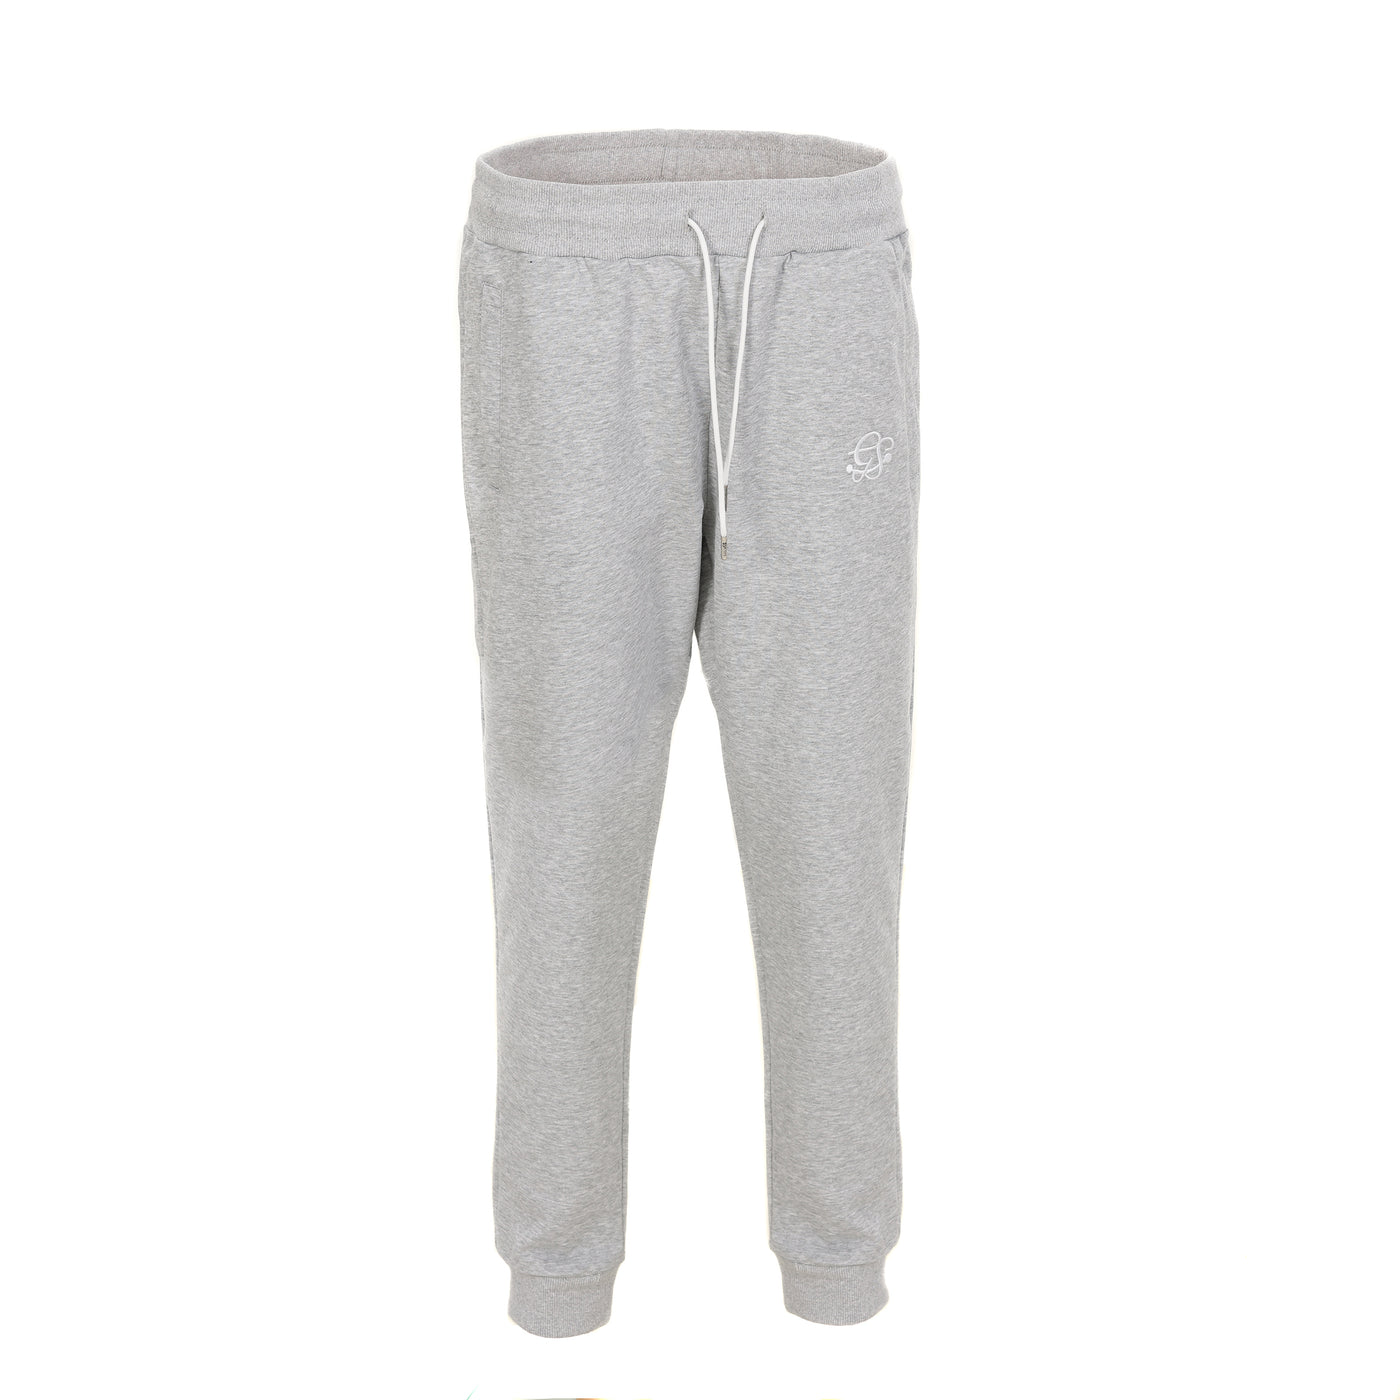 Classic Lightweight French Terry Joggers - Marl Grey